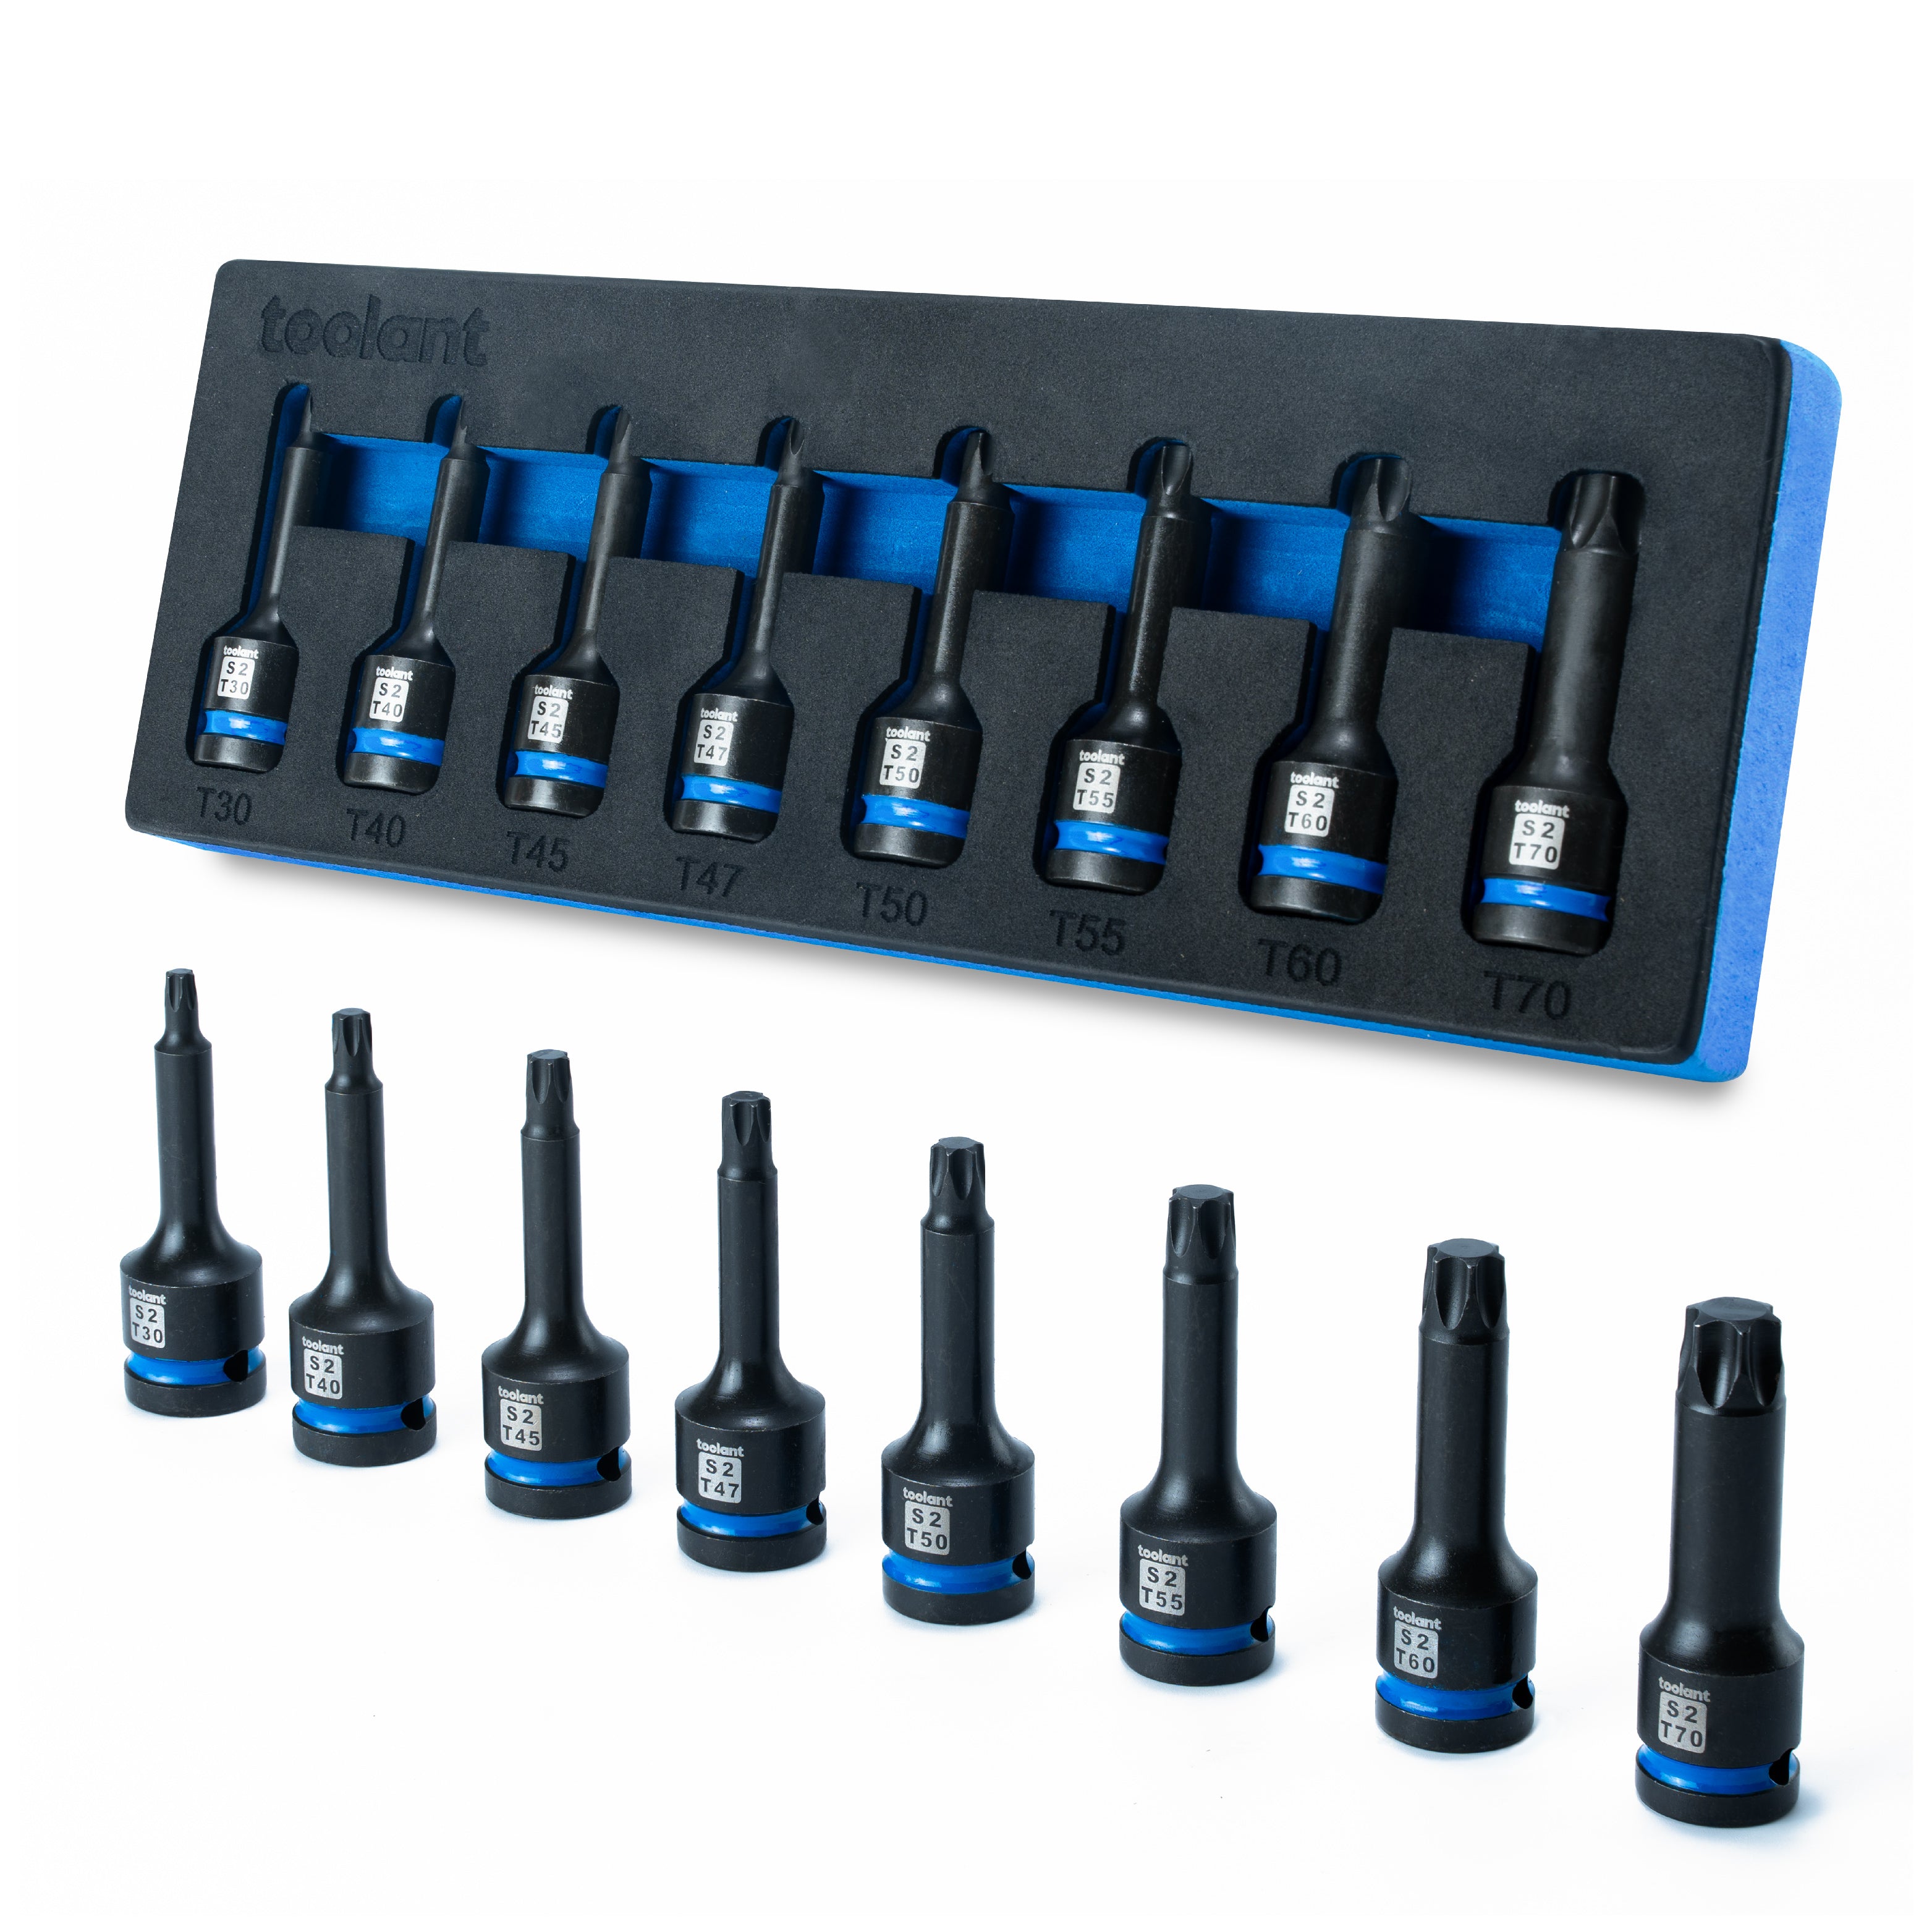 Torx Impact Bit Socket Set, made with 1/2" S2 Steel, for Professional Mechanic & Automotive Repair